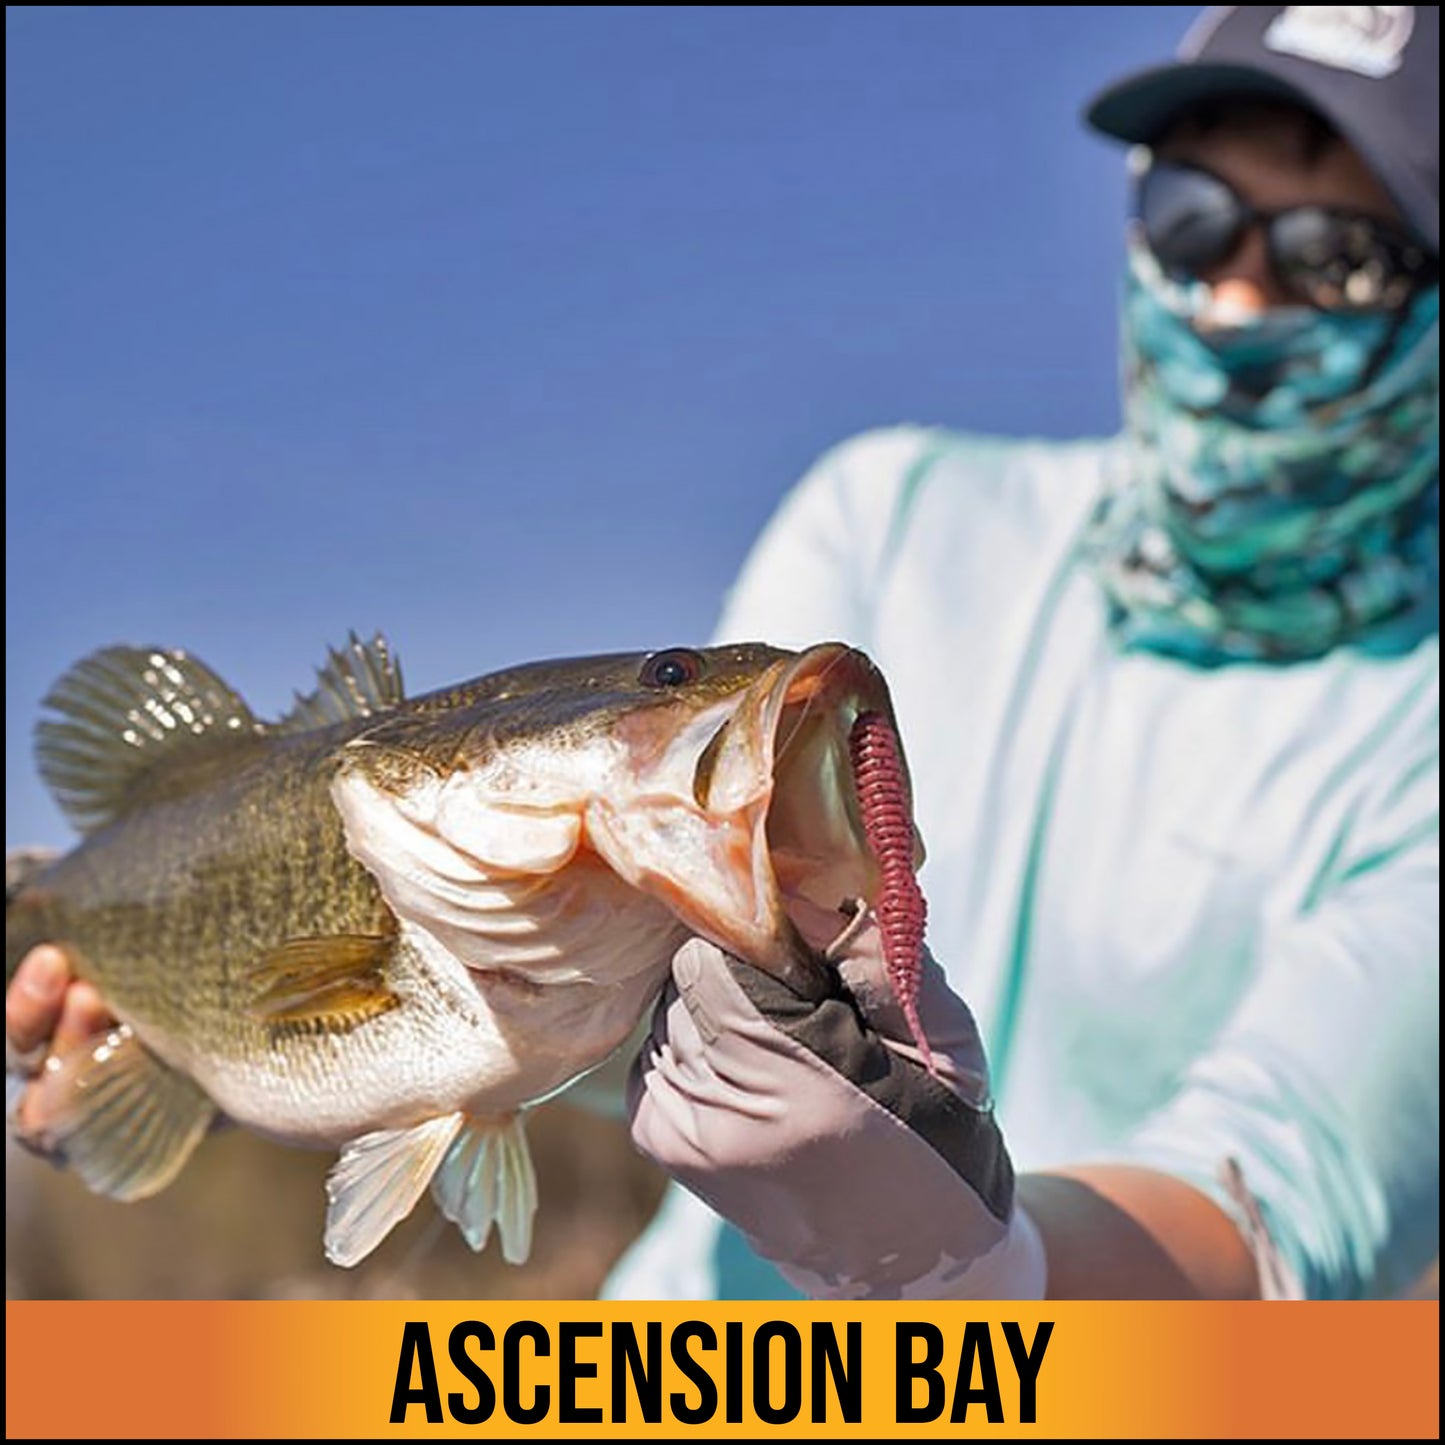 The Ascension Bay Sun Glove is a popular model in our sun protection line. Independently tested and verified, it is rated at the maximum protection of UPF 50+. Providing both hand and wrist protection, this glove is great for any of your outdoor adventures.